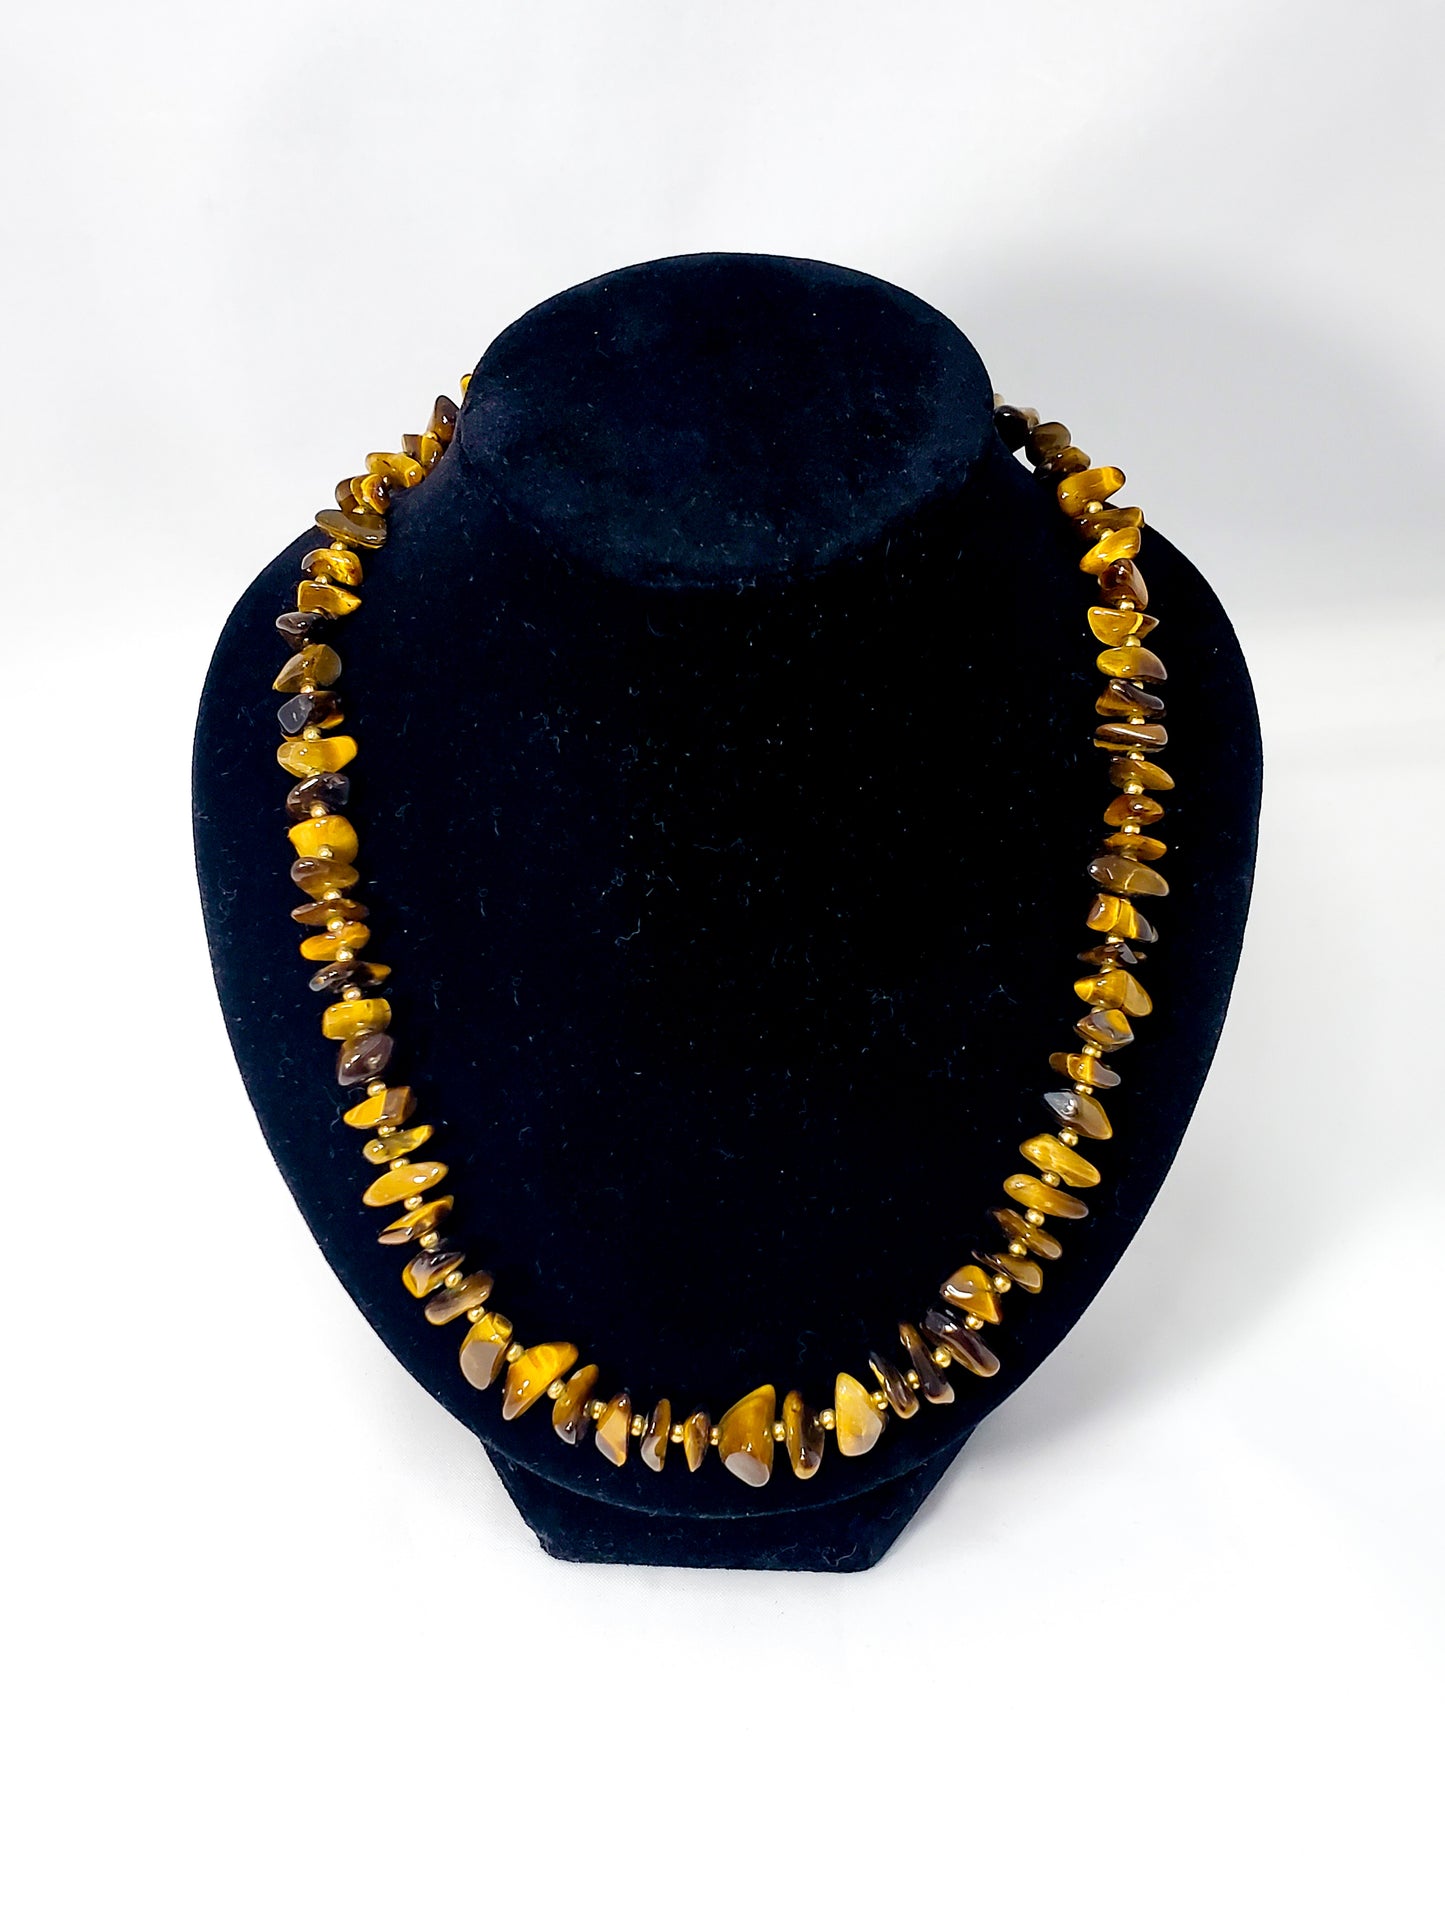 Flashy striated Tiger's Eye gemstone chip necklace with gold filled accents 16 inches